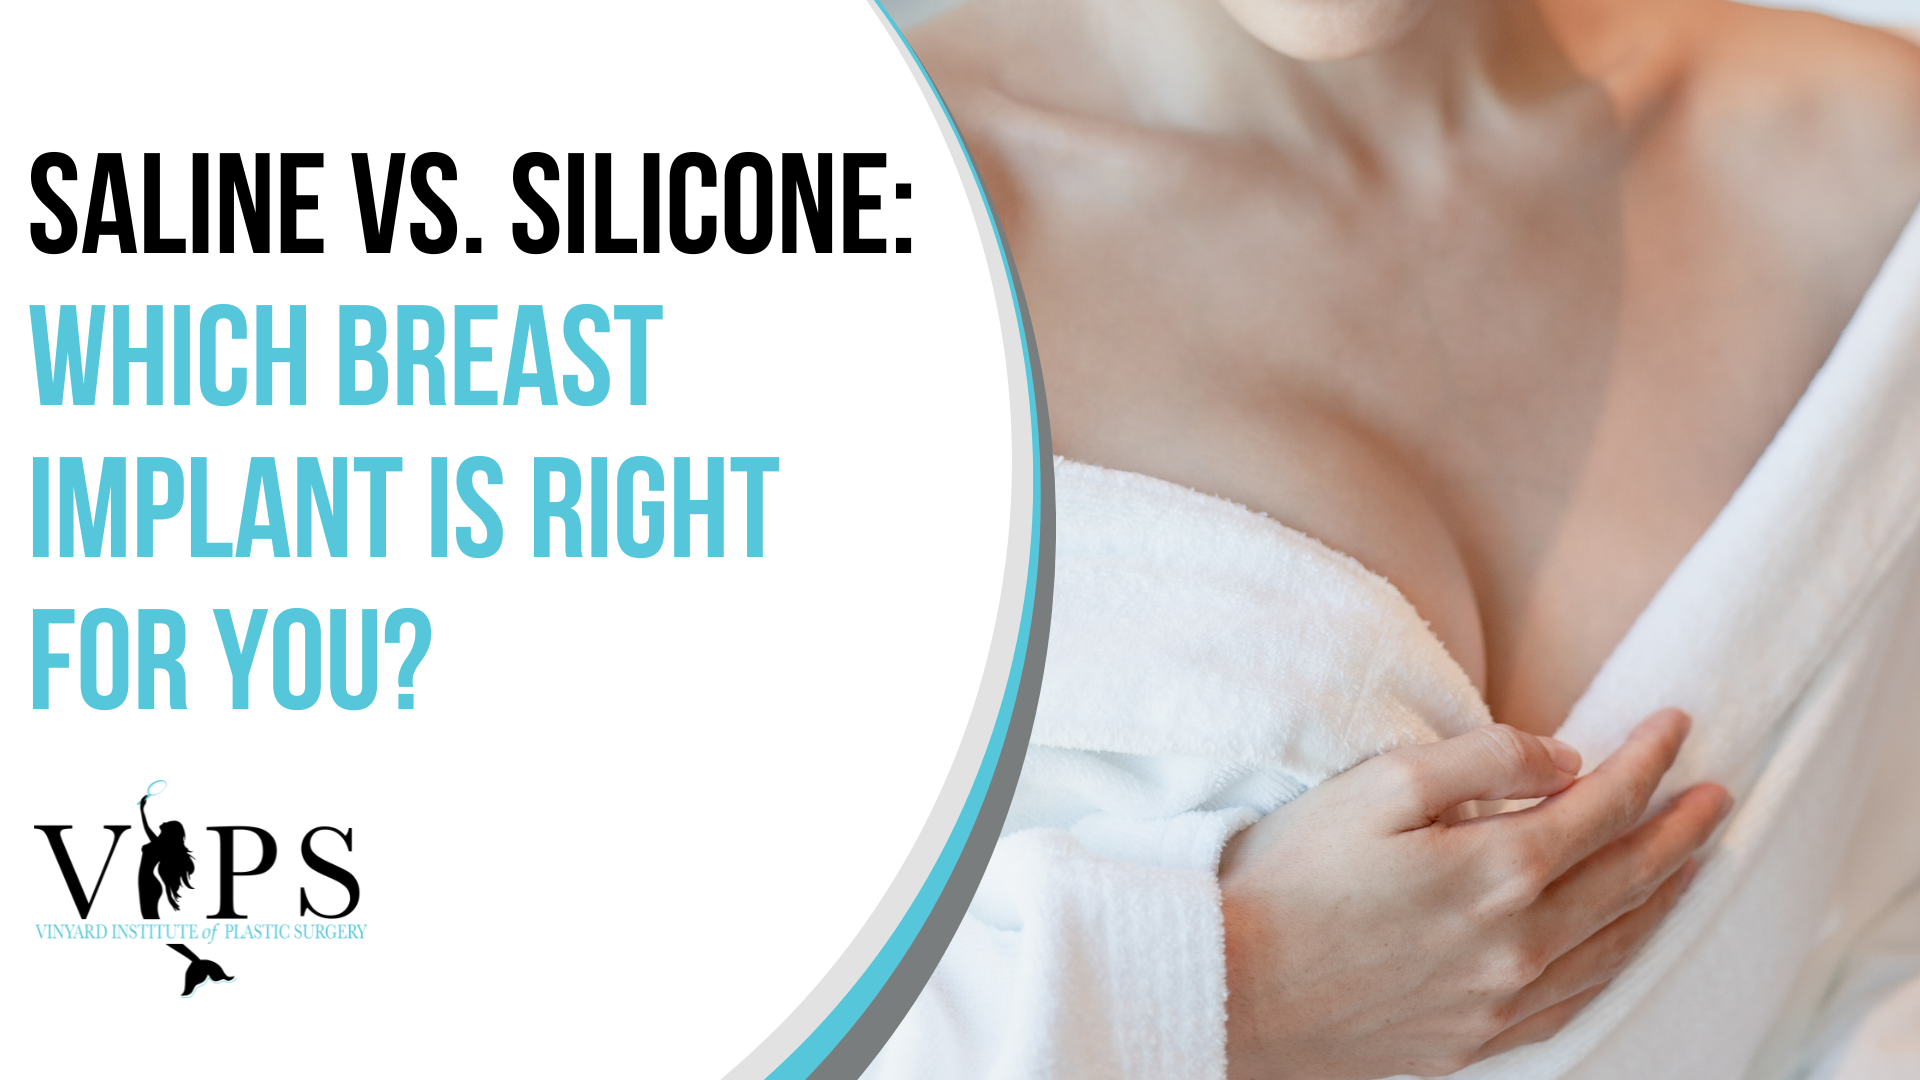 Saline vs. Silicone: Which Breast Implant is Right for You?